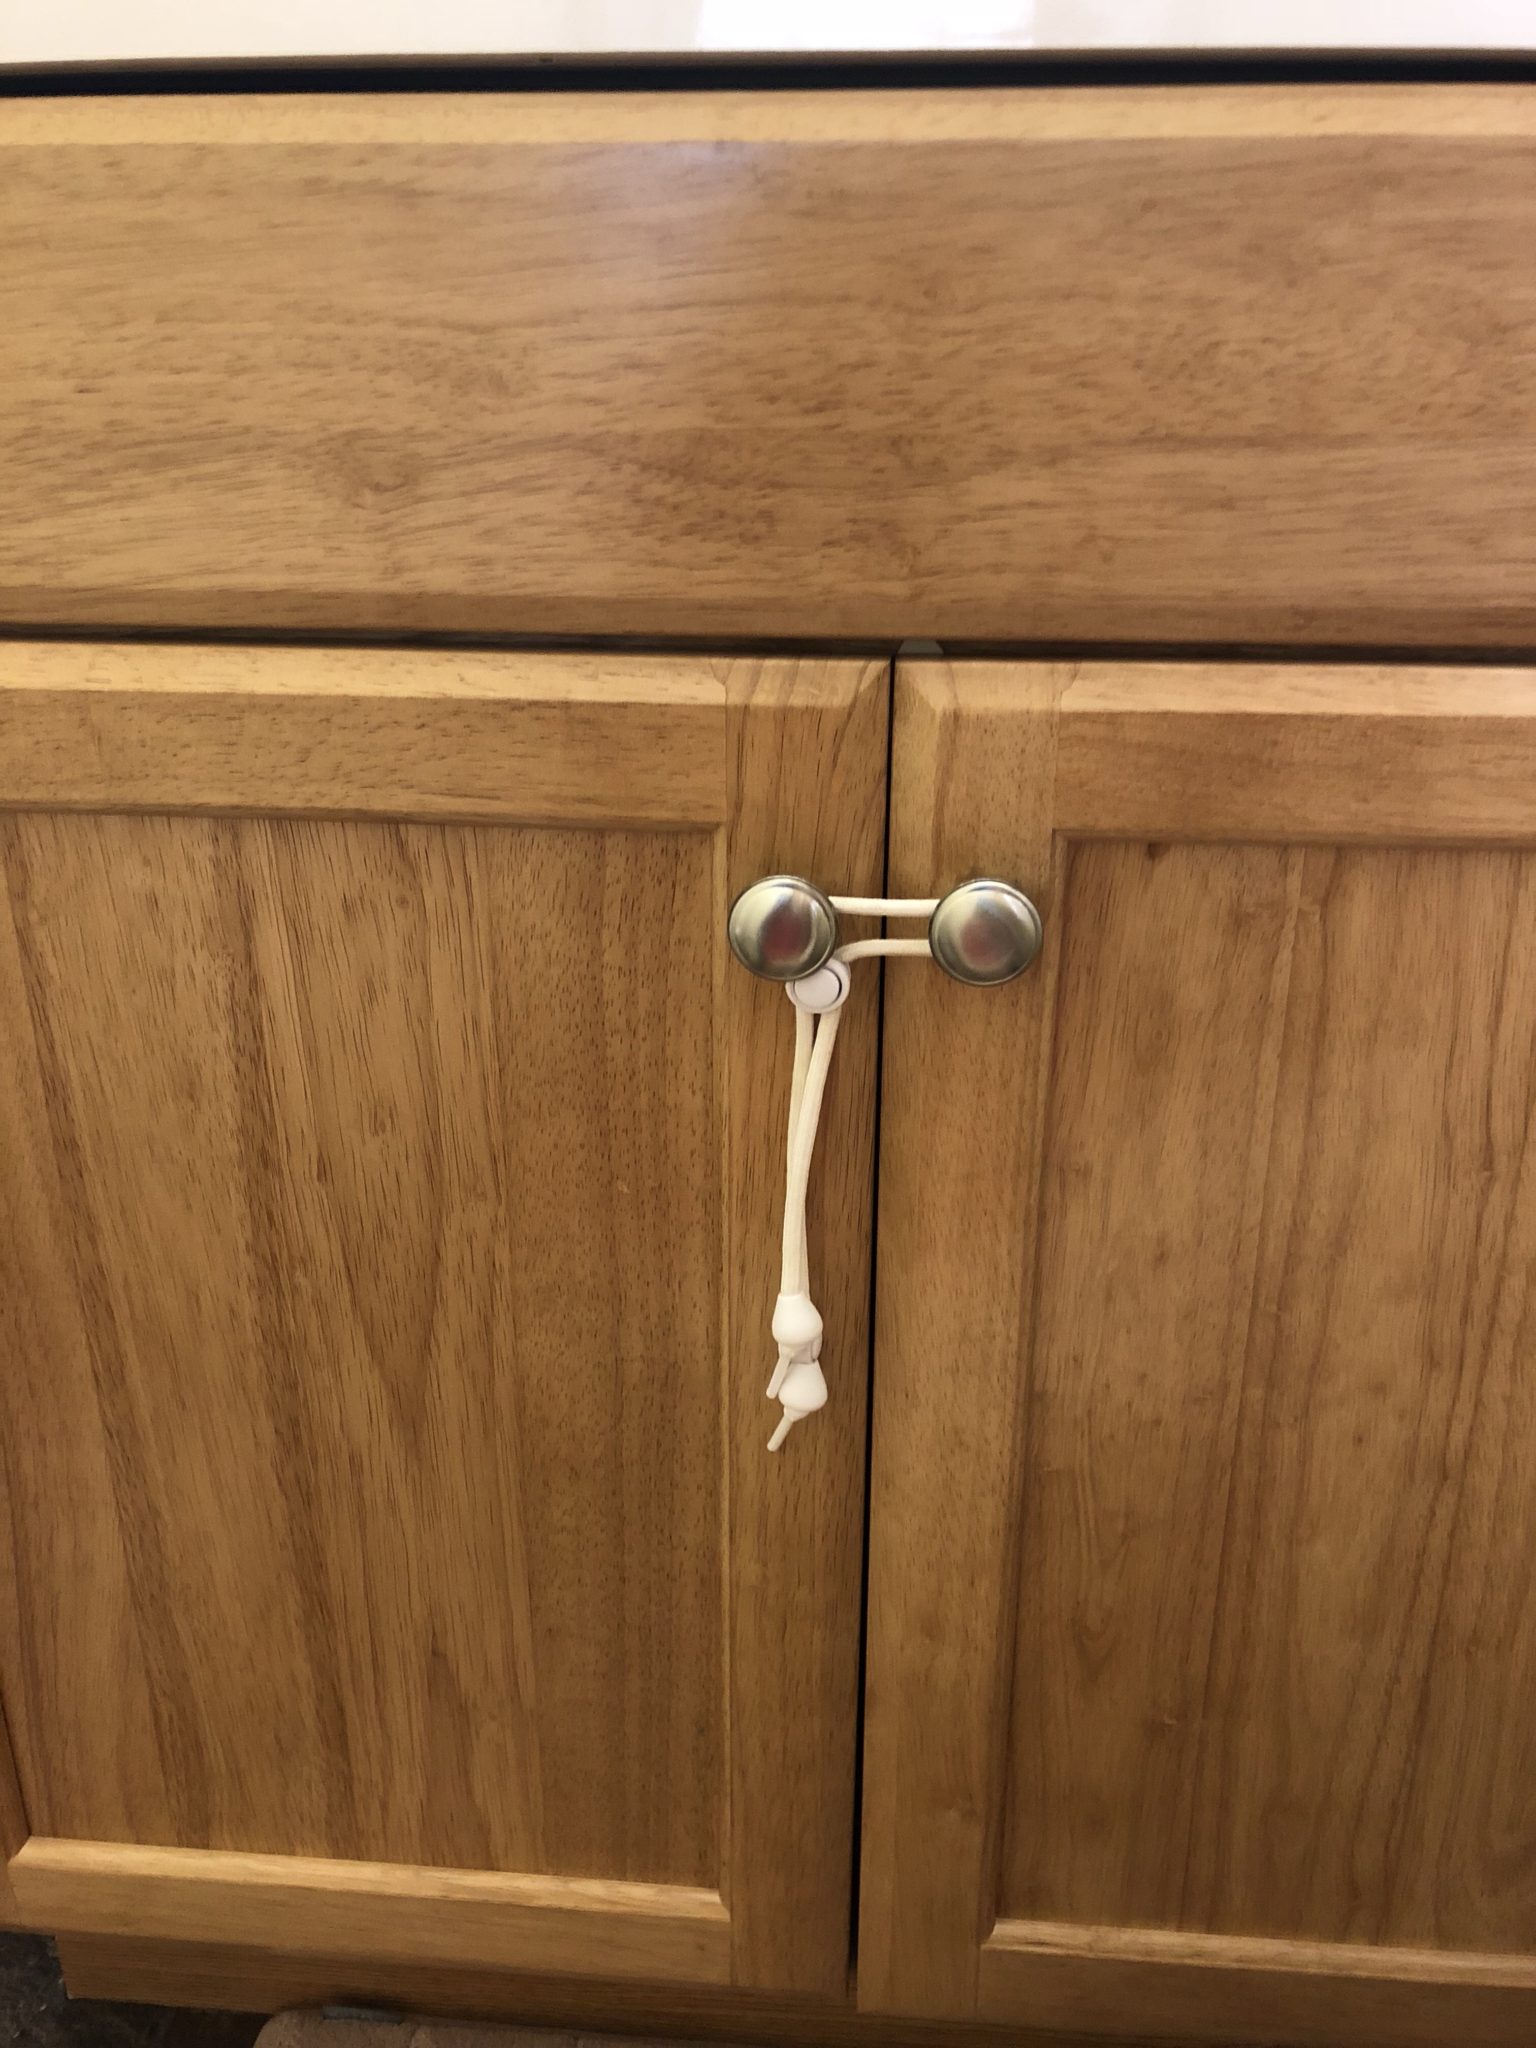 Cupboard with rope lock.